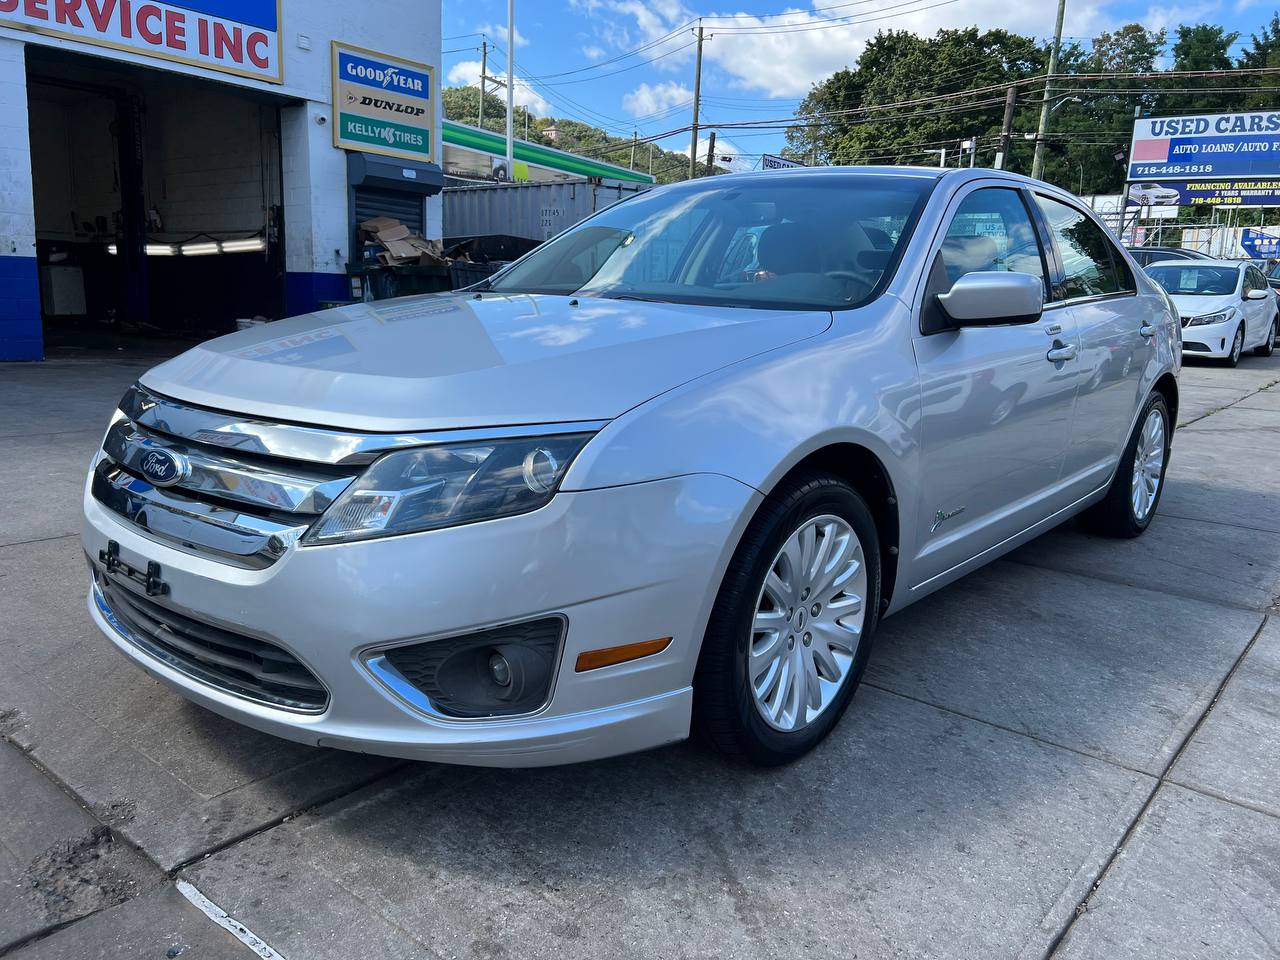 Used Car - 2012 Ford Fusion Hybrid for Sale in Staten Island, NY